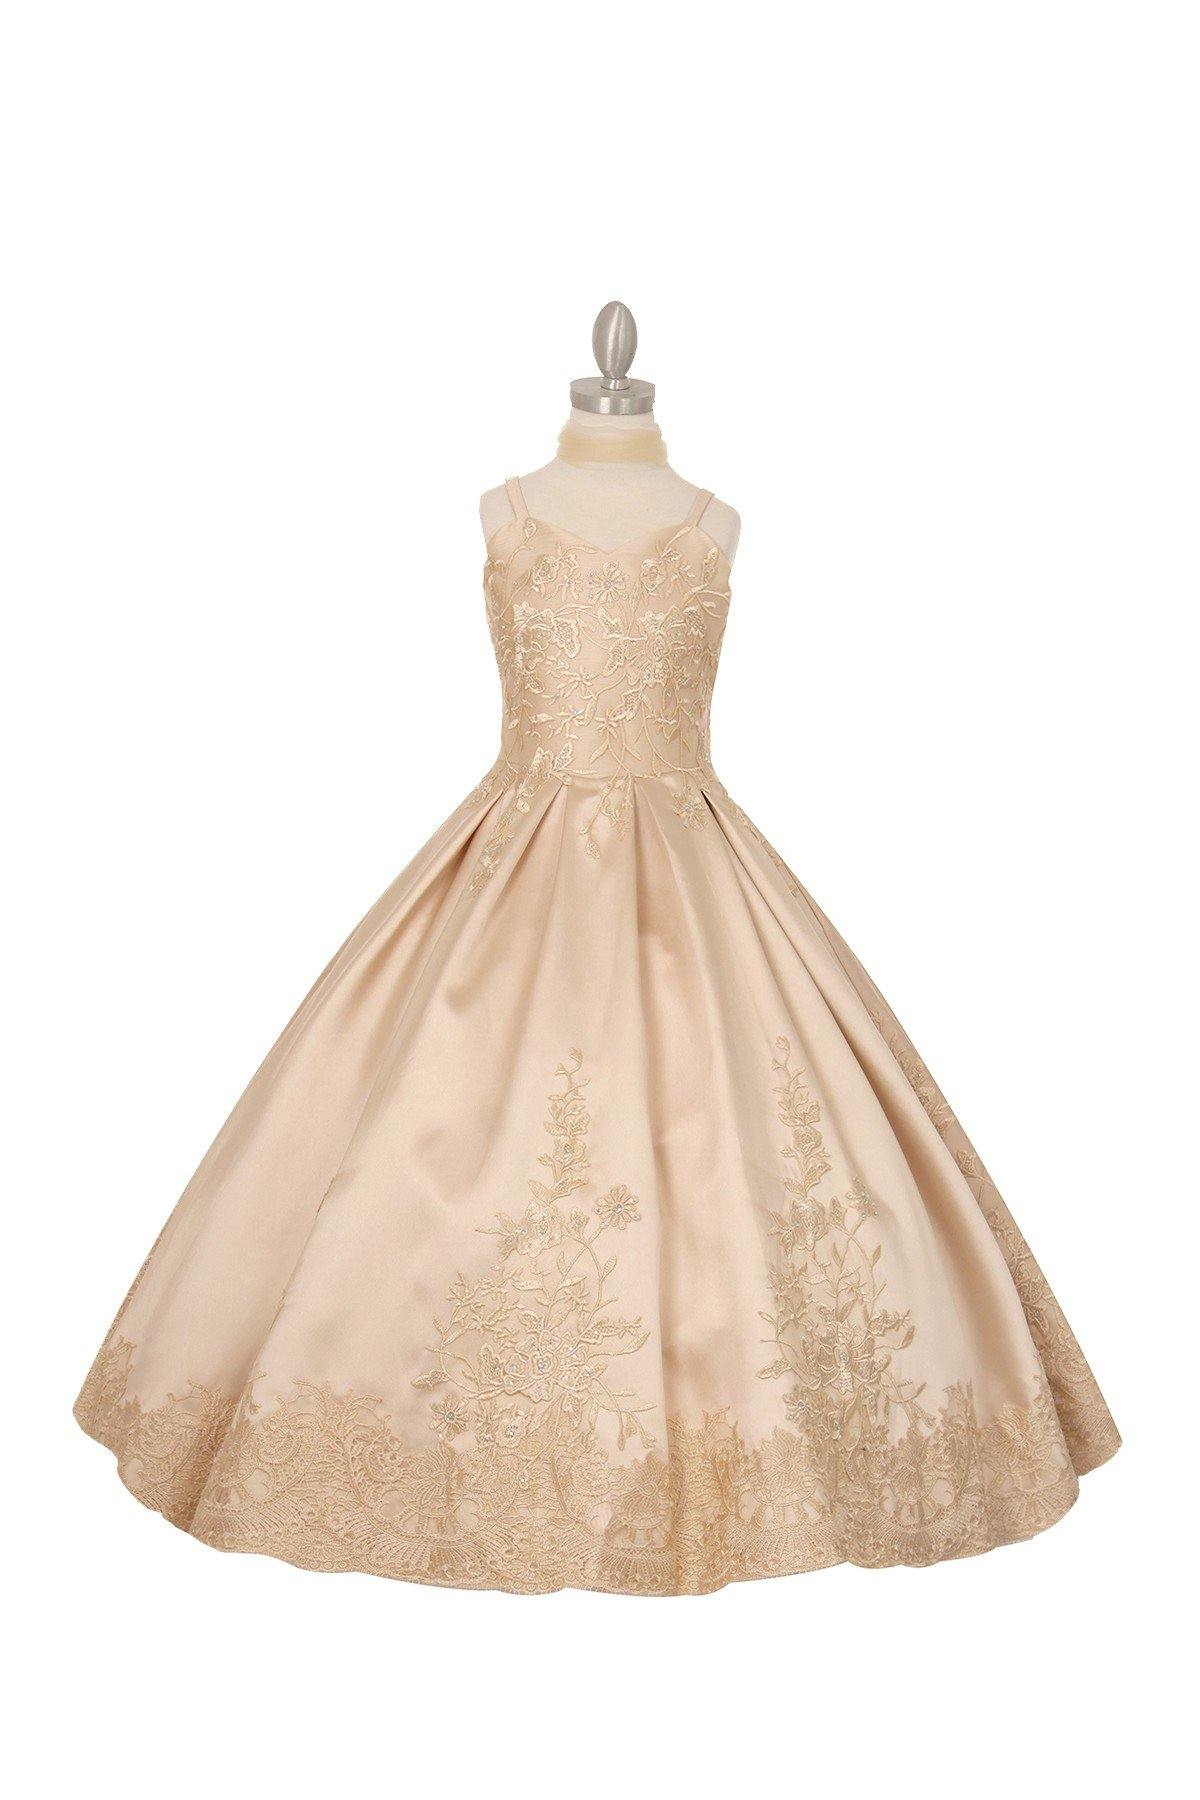 Satin Long Flower Girl Dress - The Dress Outlet Cinderella Couture